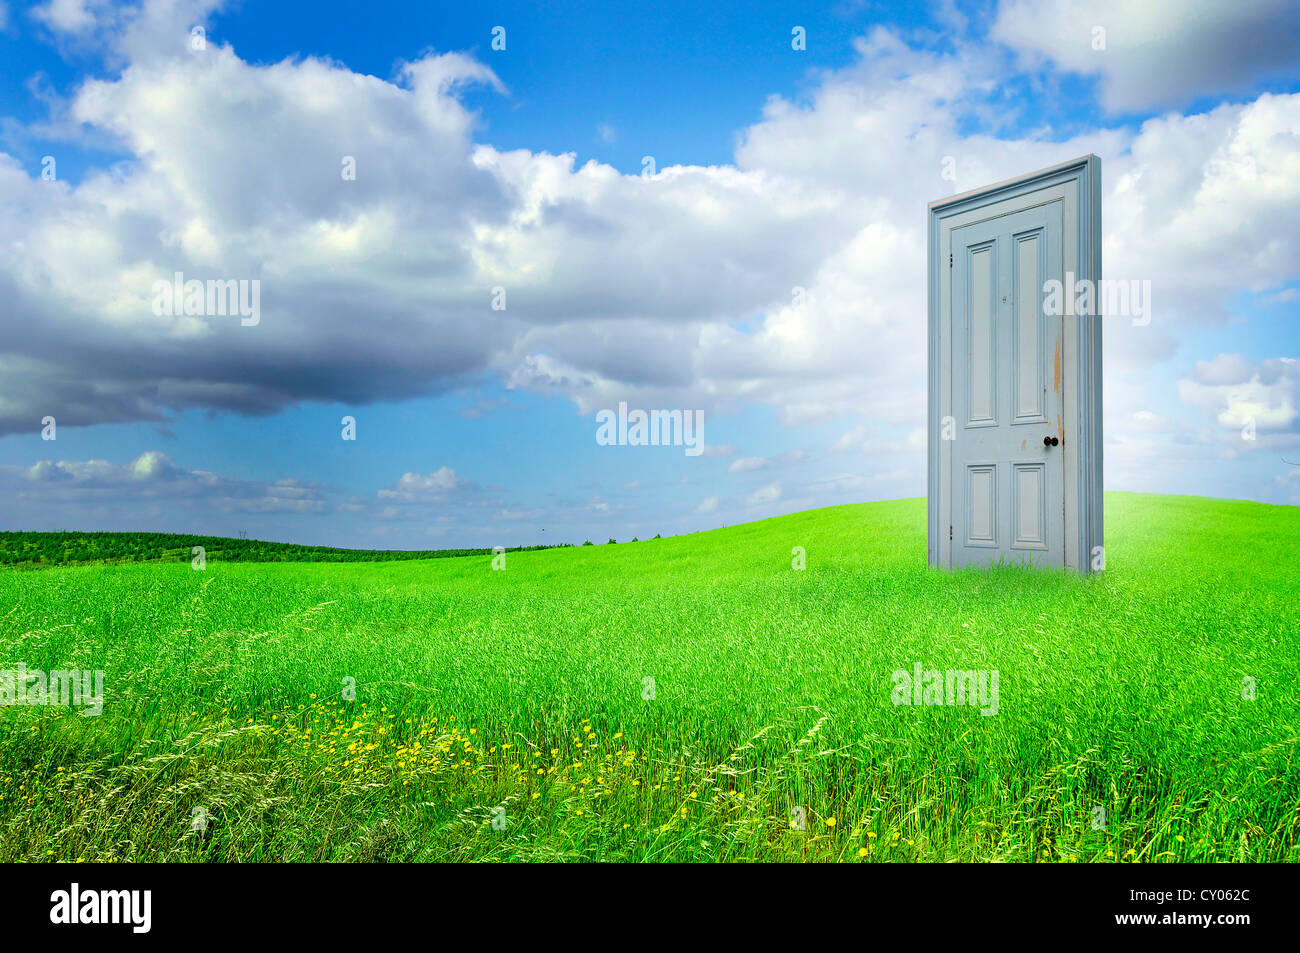 Isolated door in a grass field with blue cloudy sky Stock Photo